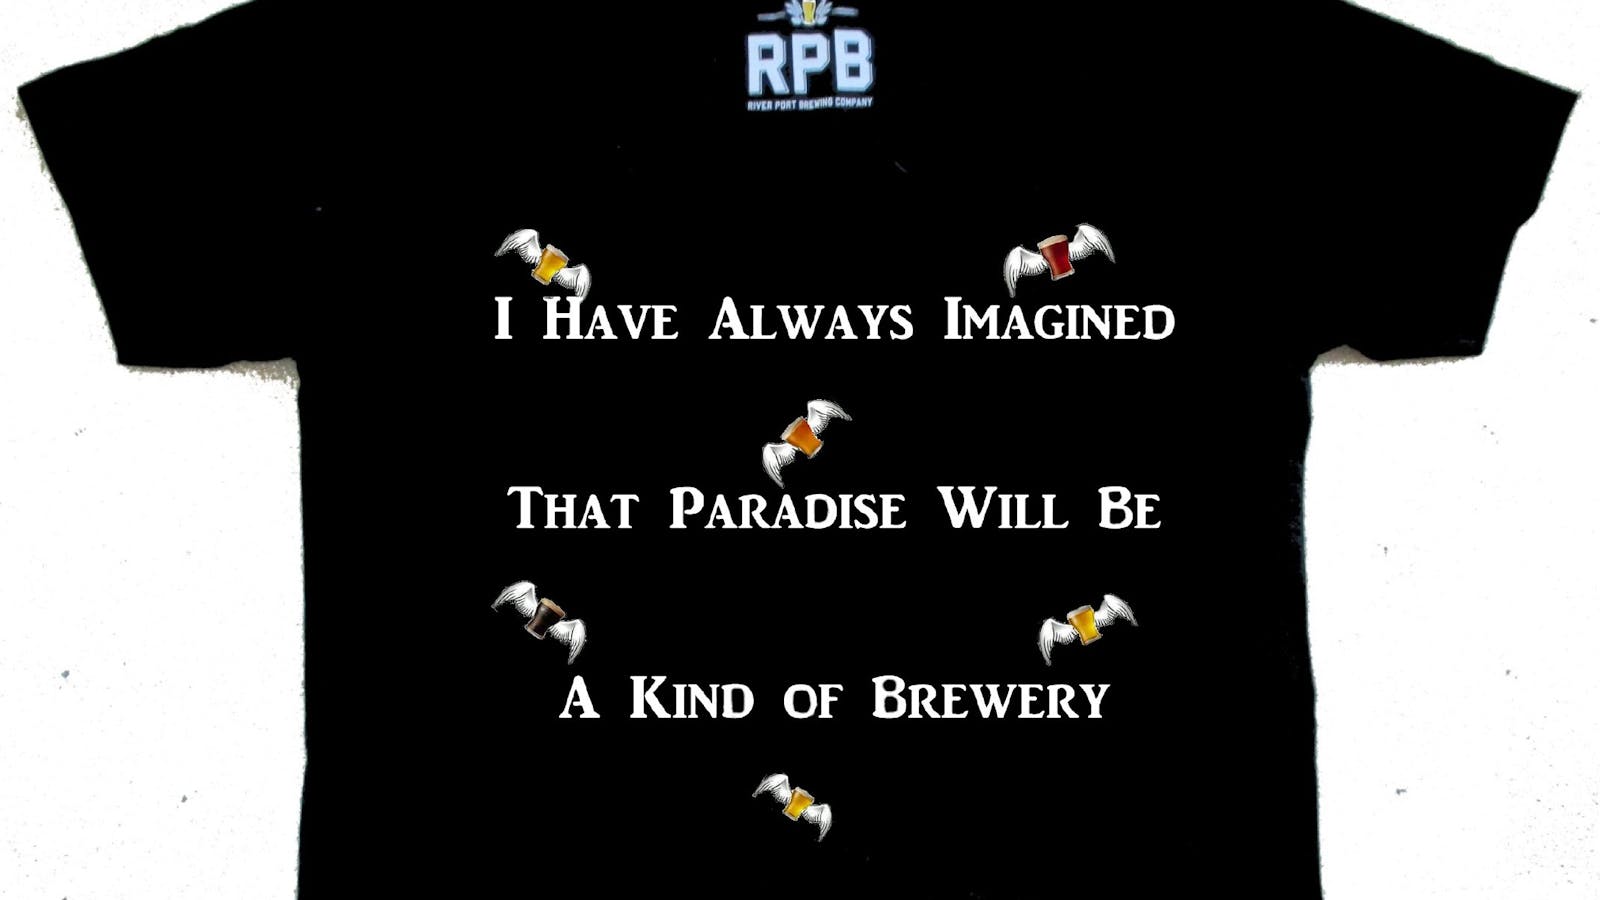 Brewery is Paradise